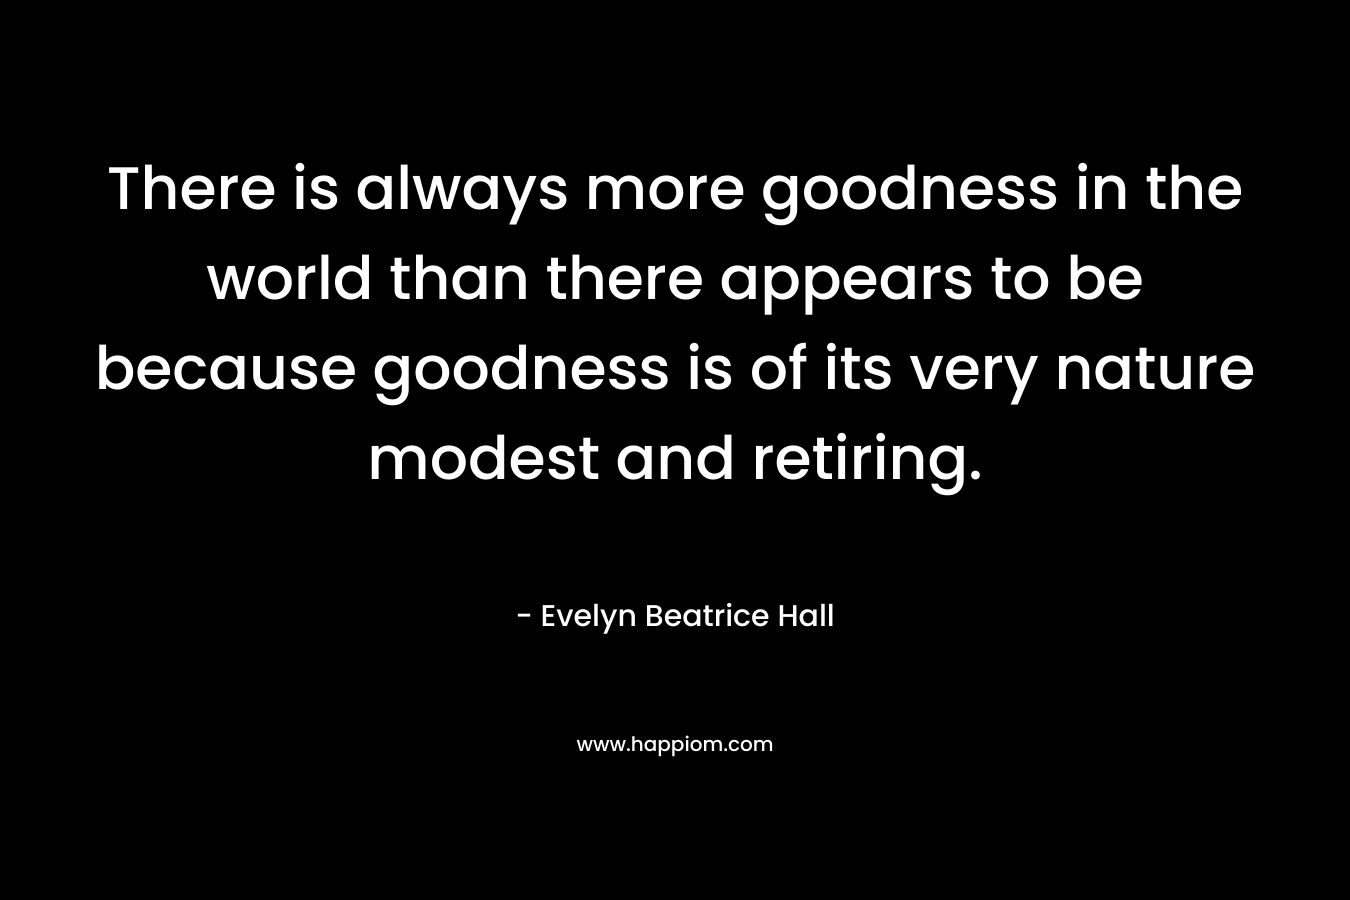 There is always more goodness in the world than there appears to be because goodness is of its very nature modest and retiring. – Evelyn Beatrice Hall